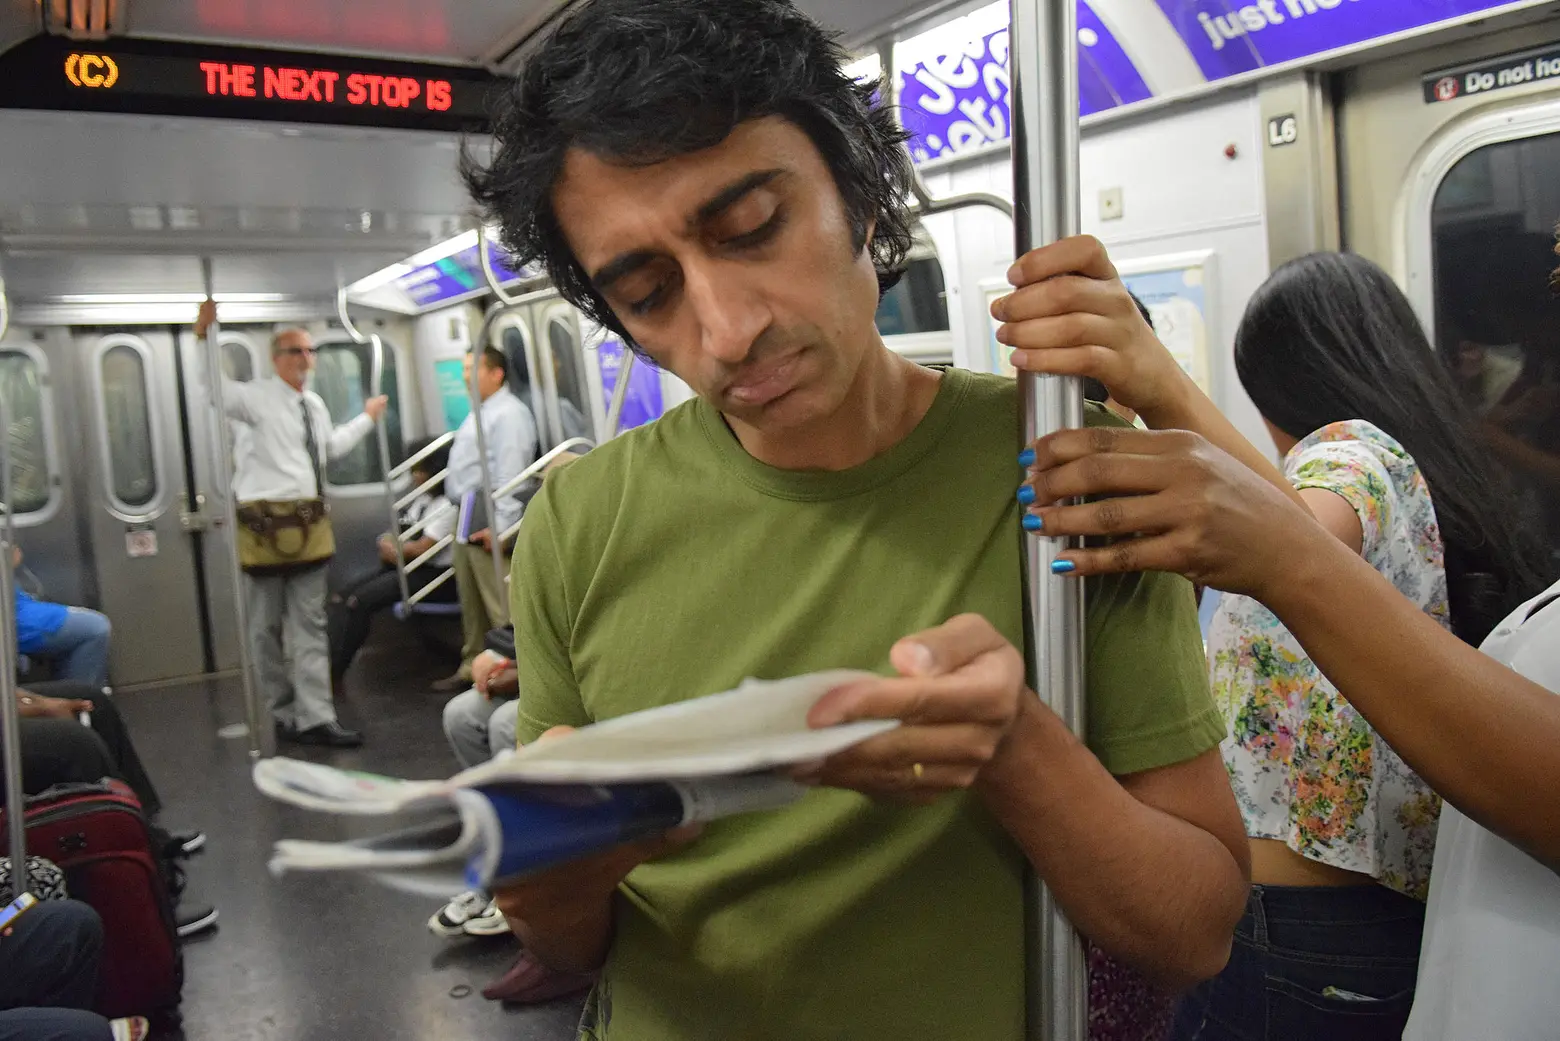 The 11 Types of Subway Pole Grips; Feel Like You’re Flying on This Horizontal Bike